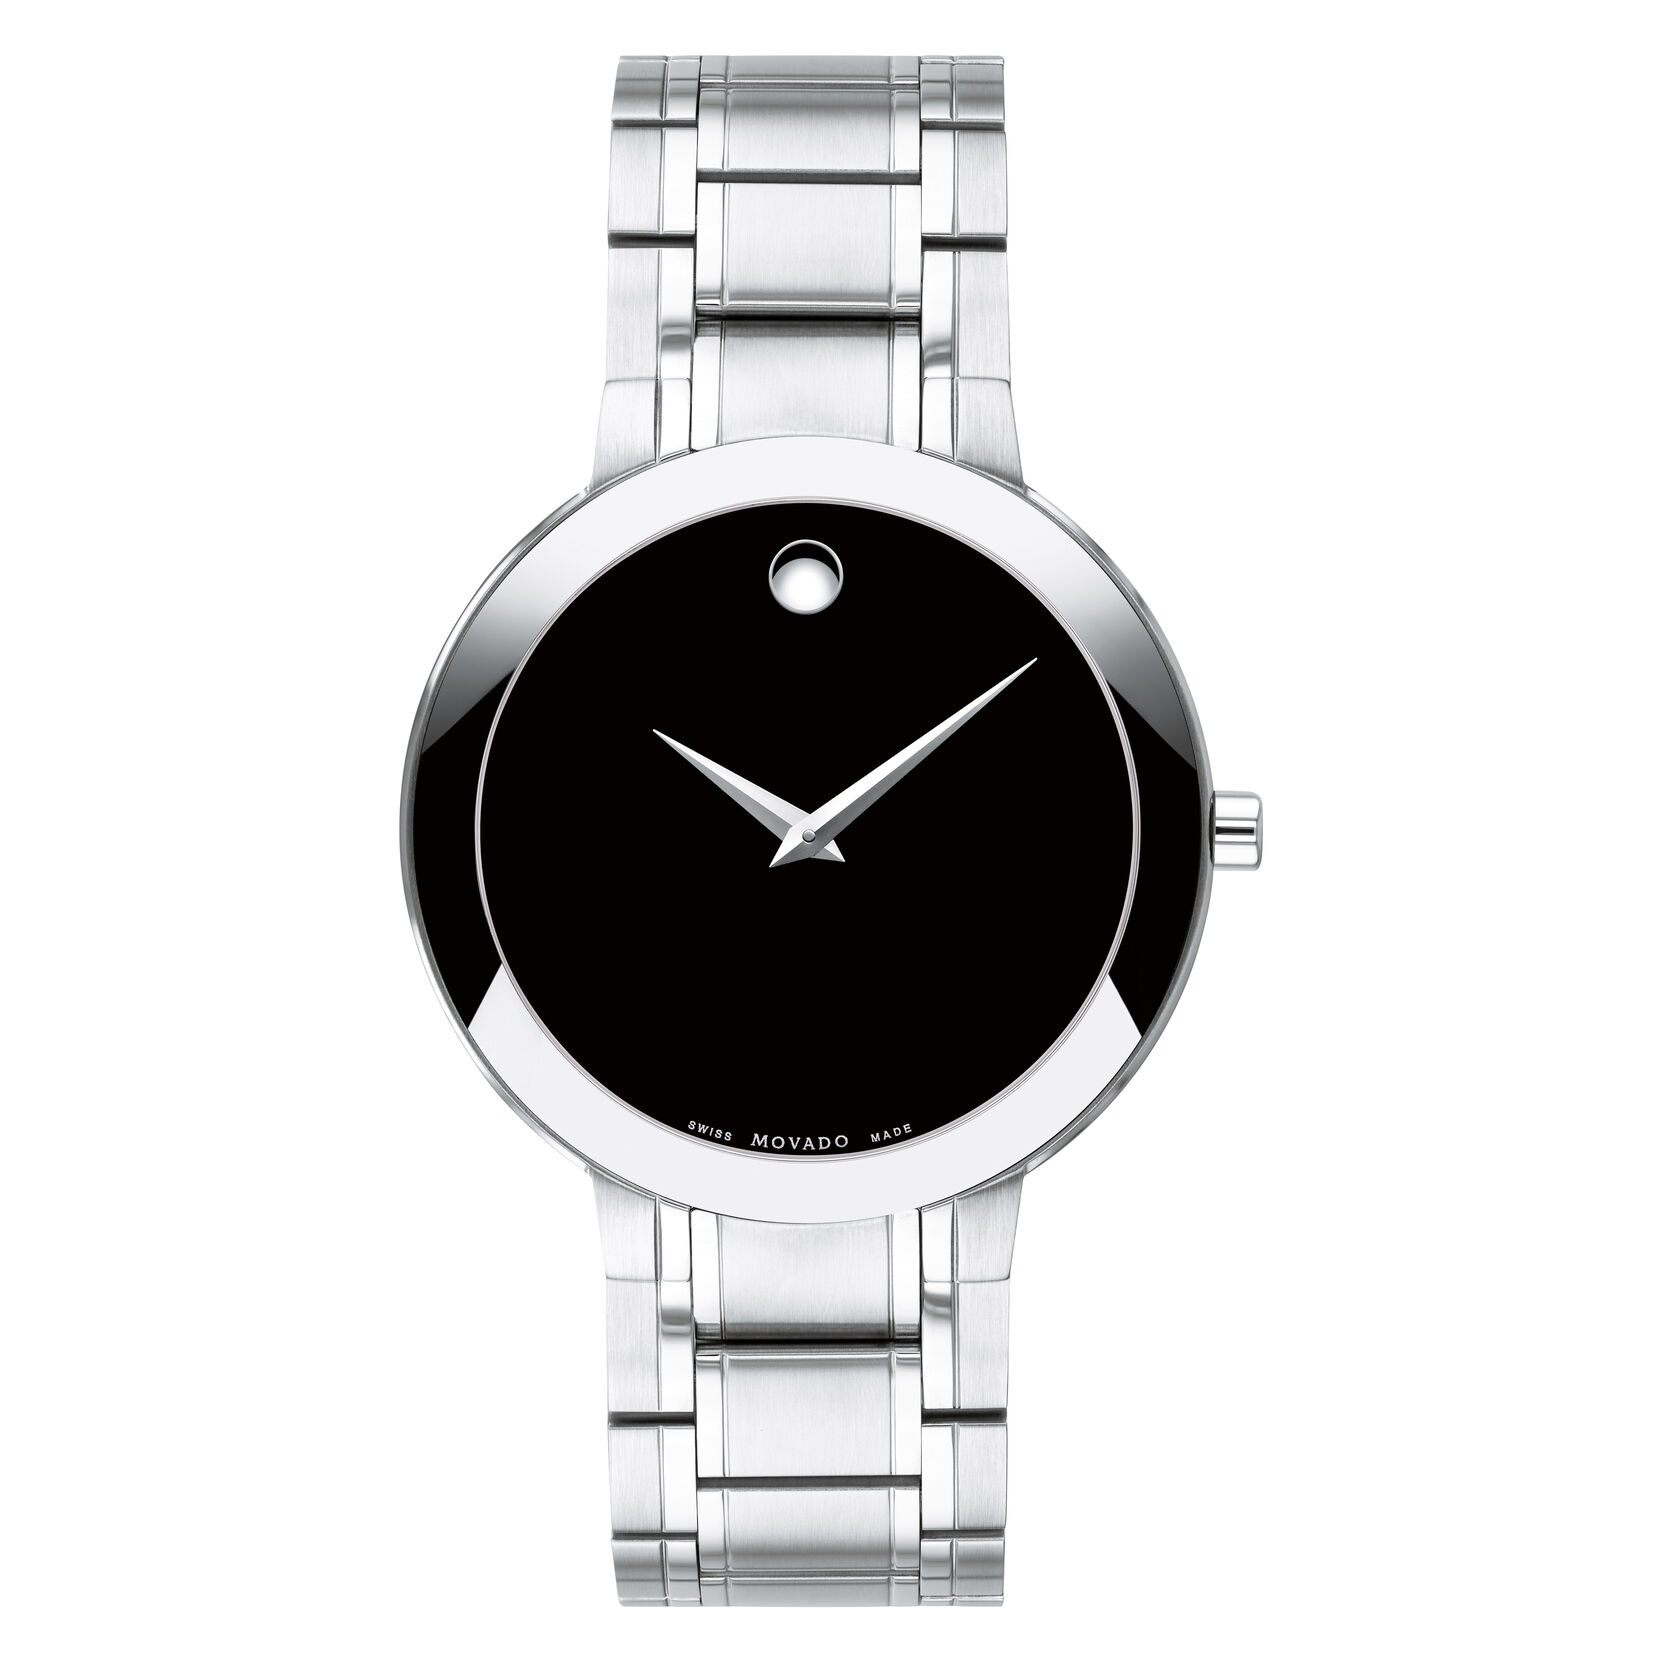 Store case Movado |Men\'s 40mm and steel bracelet | stainless Movado link watch, Stiri Company